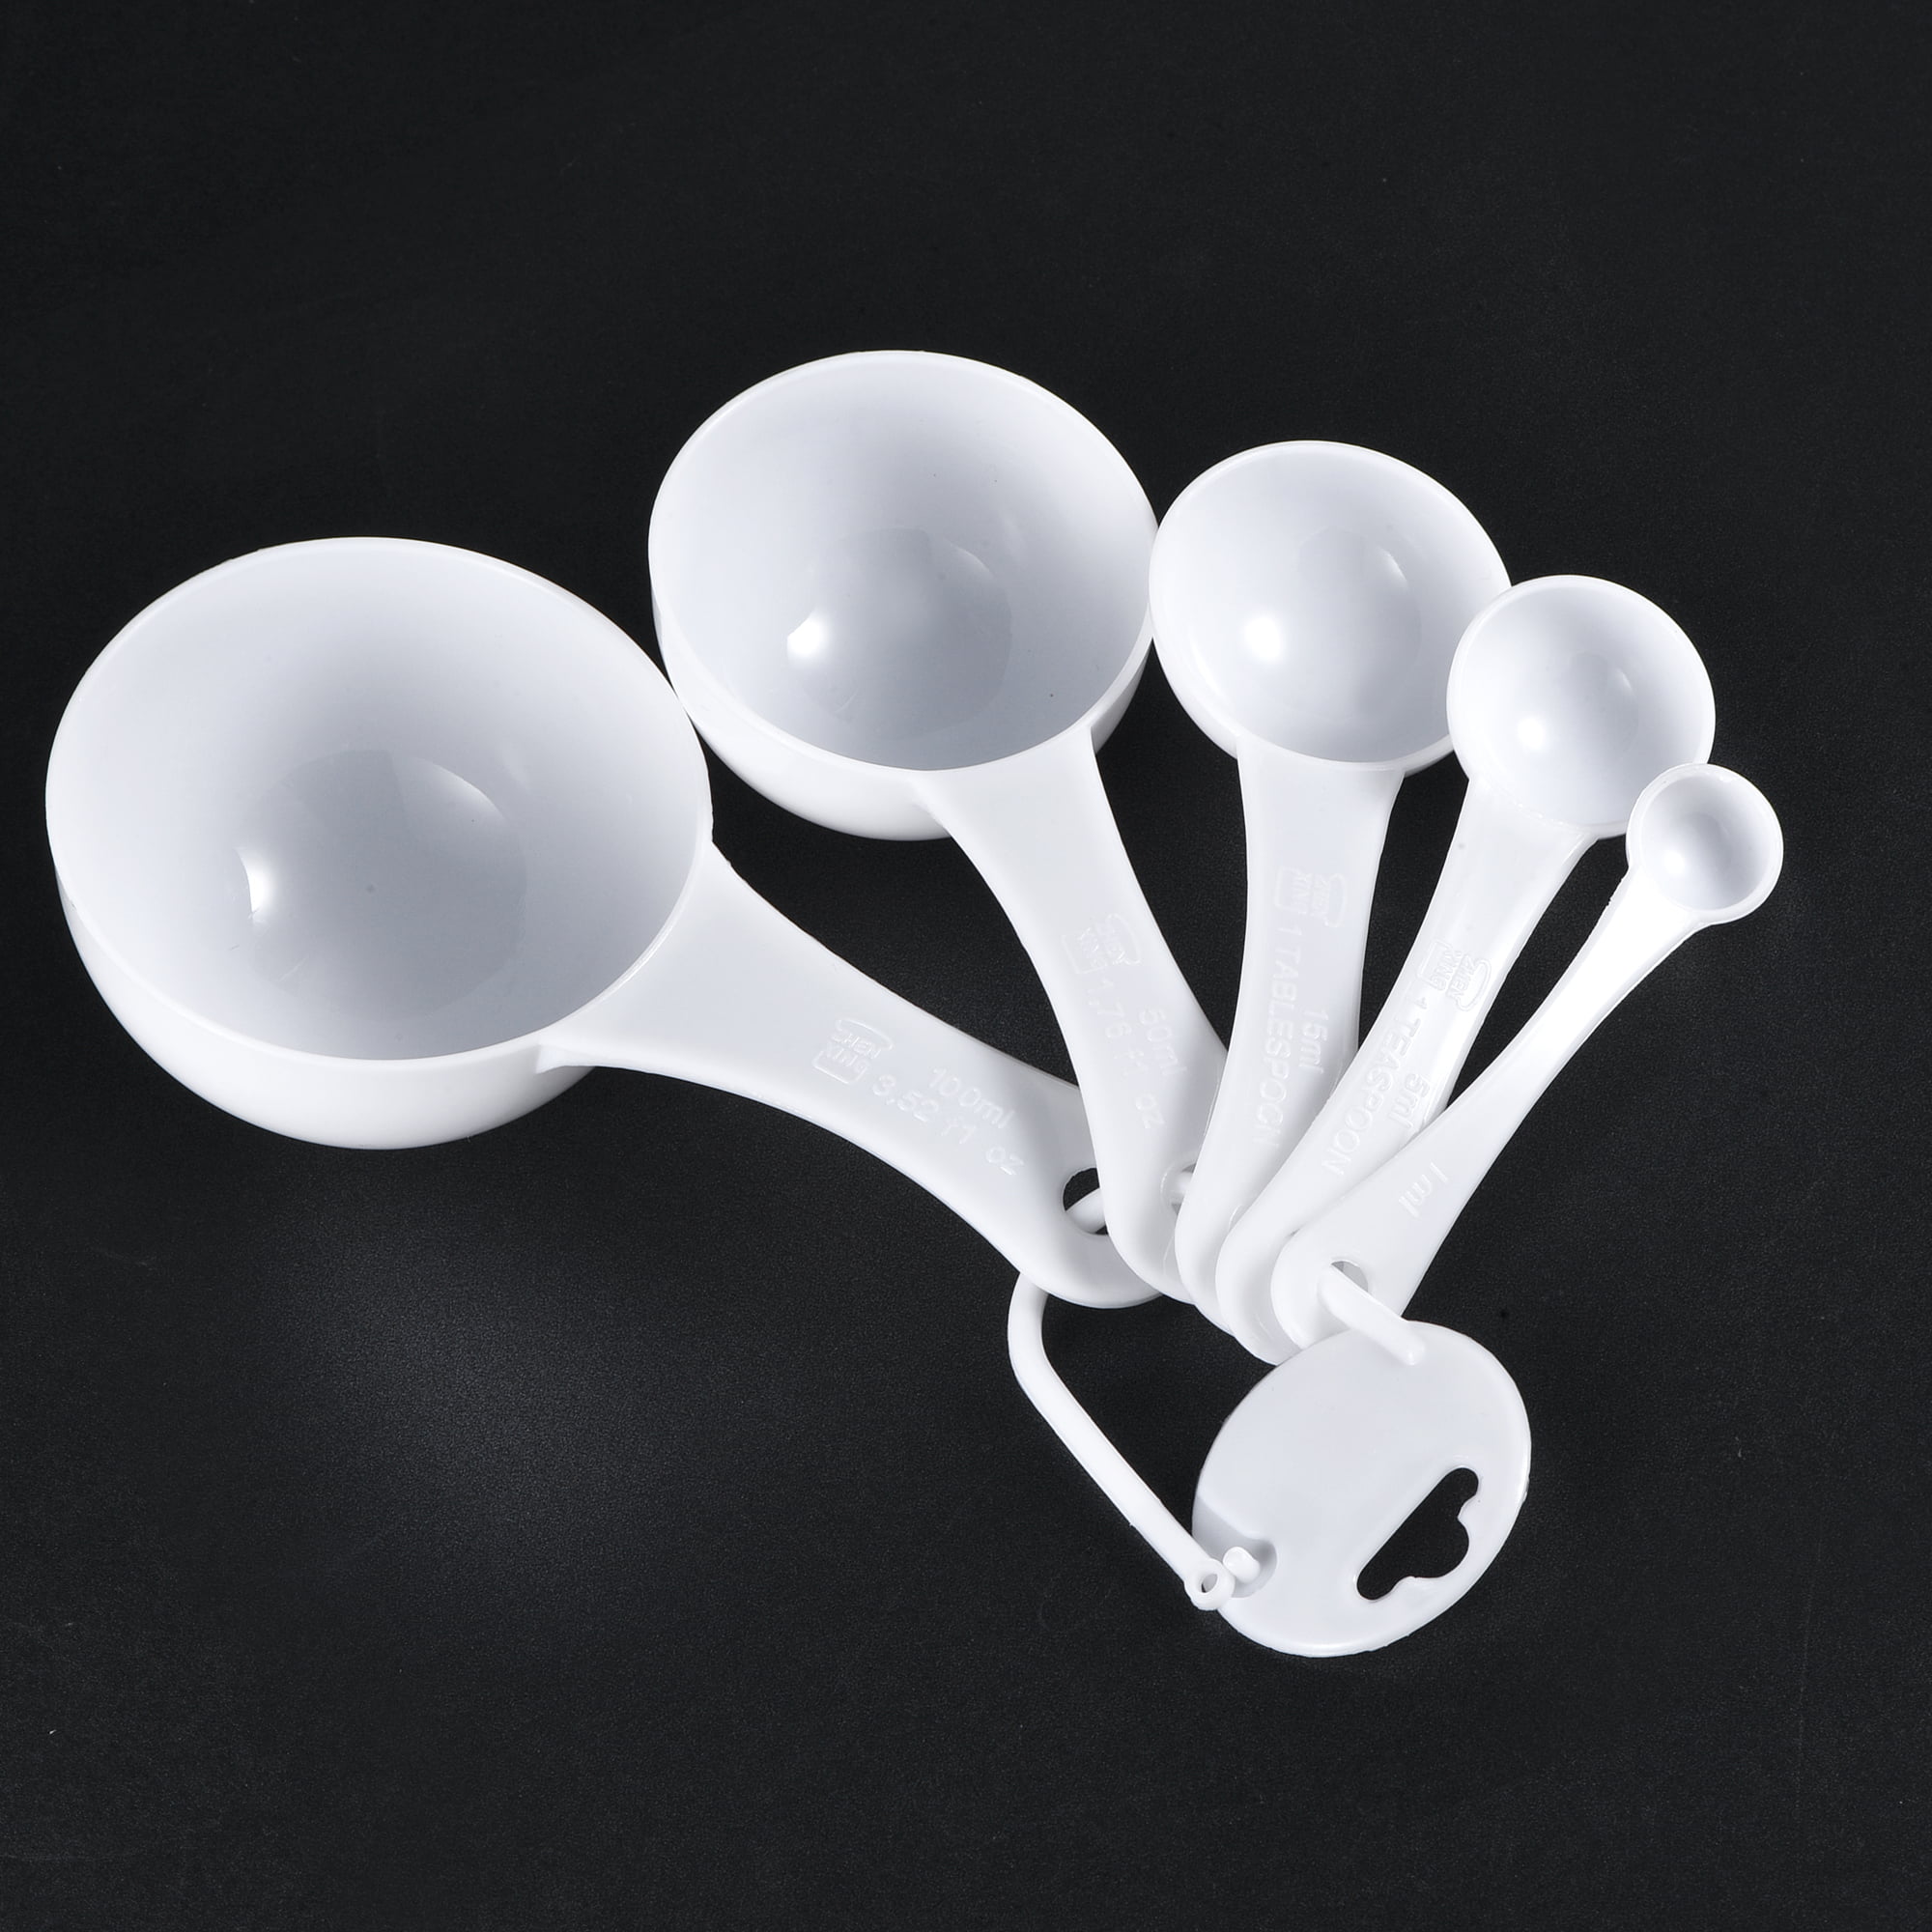 Set of Six White Measuring Spoons - Vision Forward